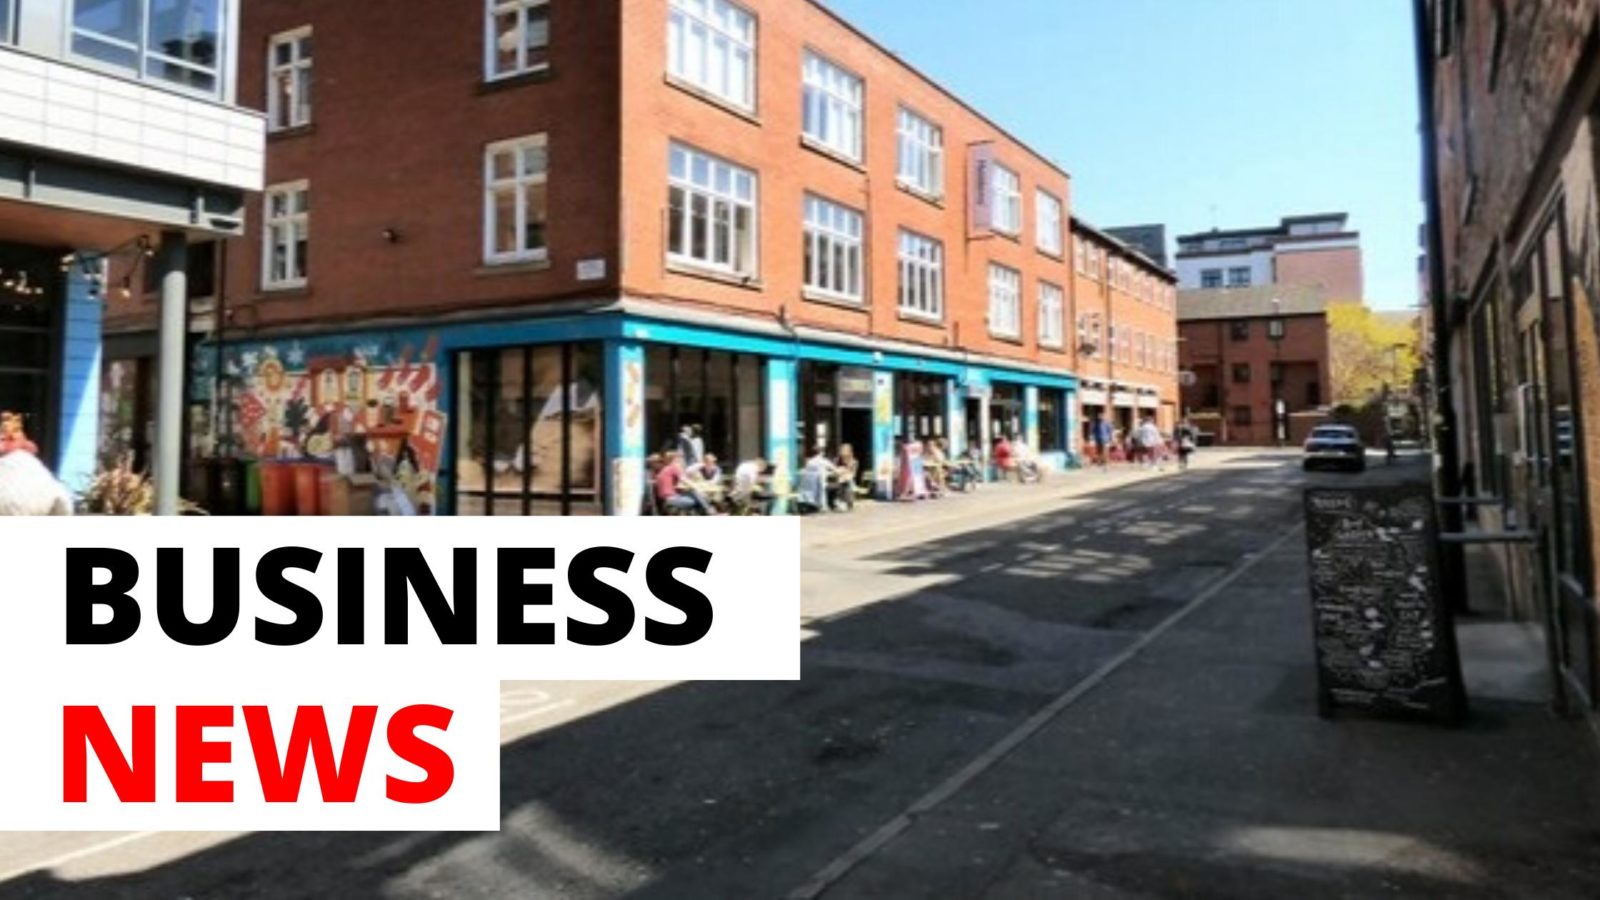 Council approves closure of streets to boost the economy